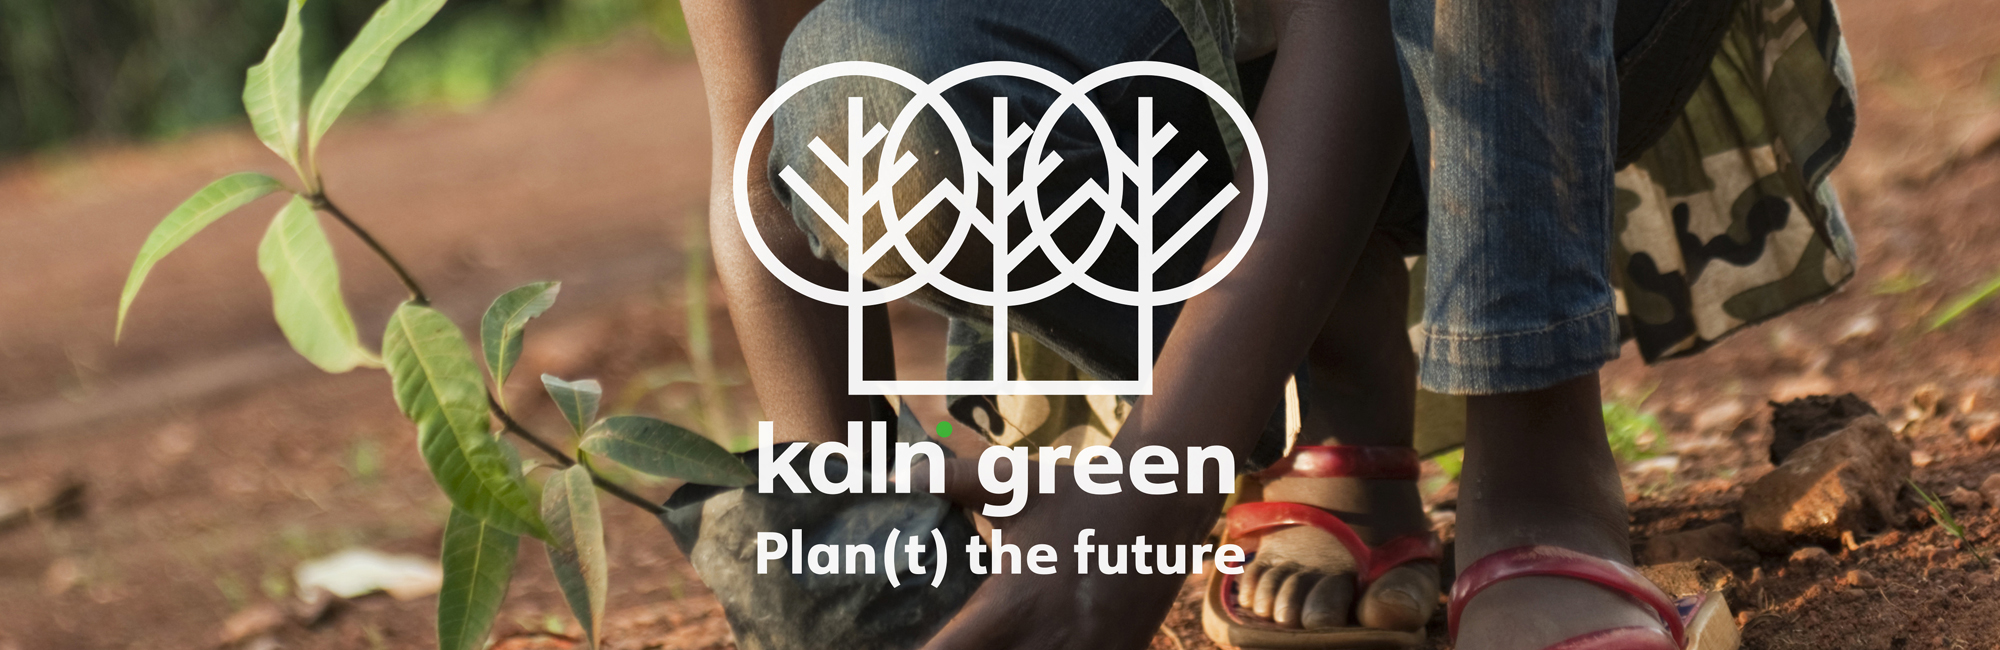 KDLN JOINS THE CAUSE OF PLANET REFORESTATION